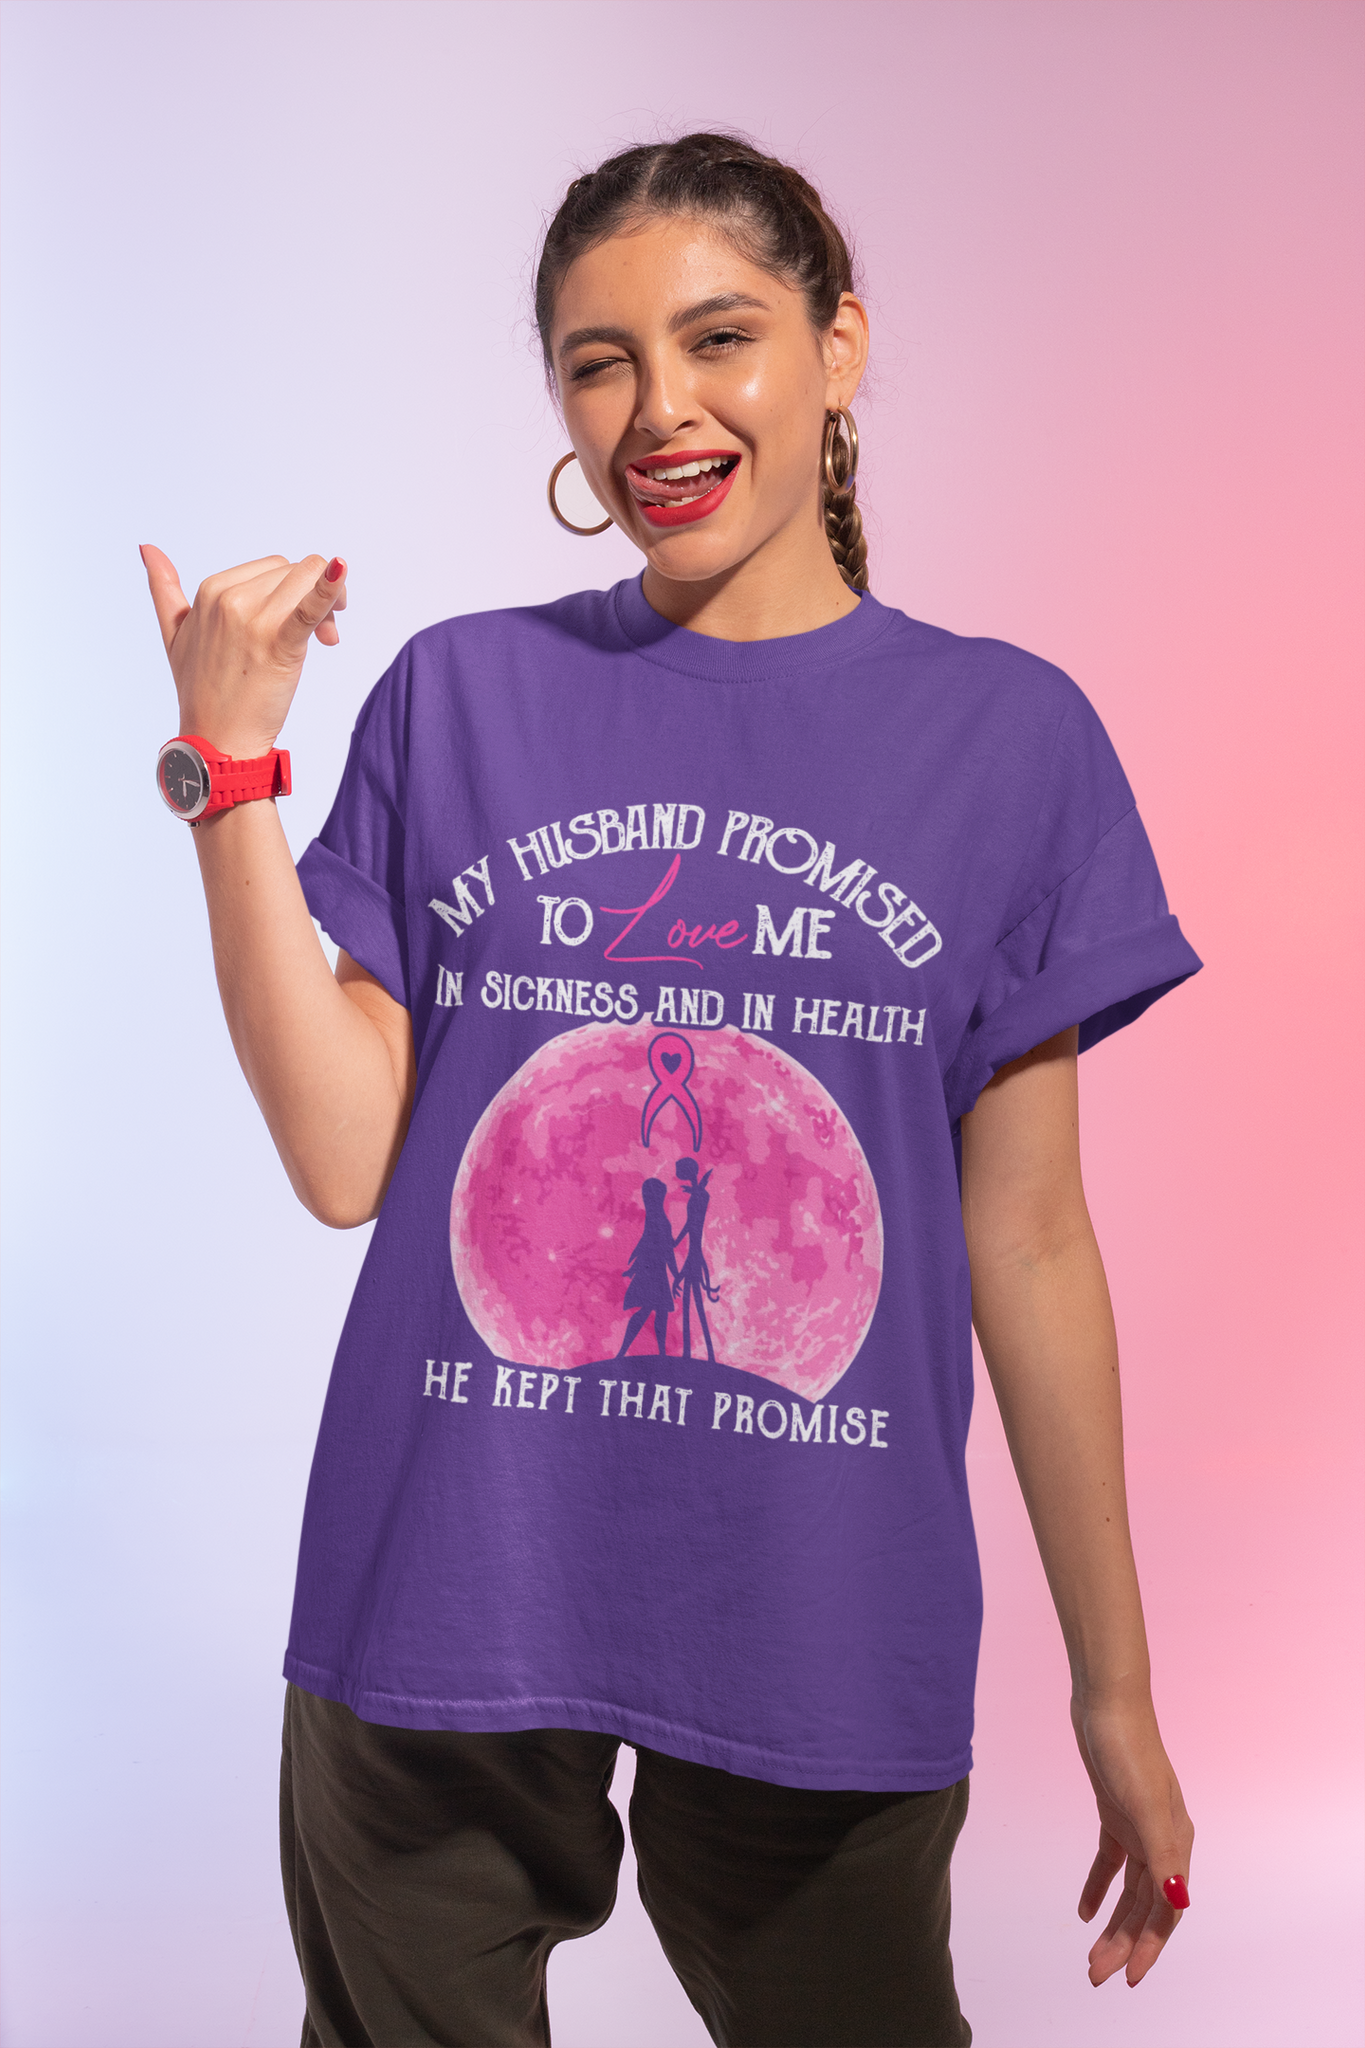 Nightmare Before Christmas T Shirt, Jack Skellington Sally Shirt, My Husband Promised To Love Me Tshirt, Breast Cancer Awareness